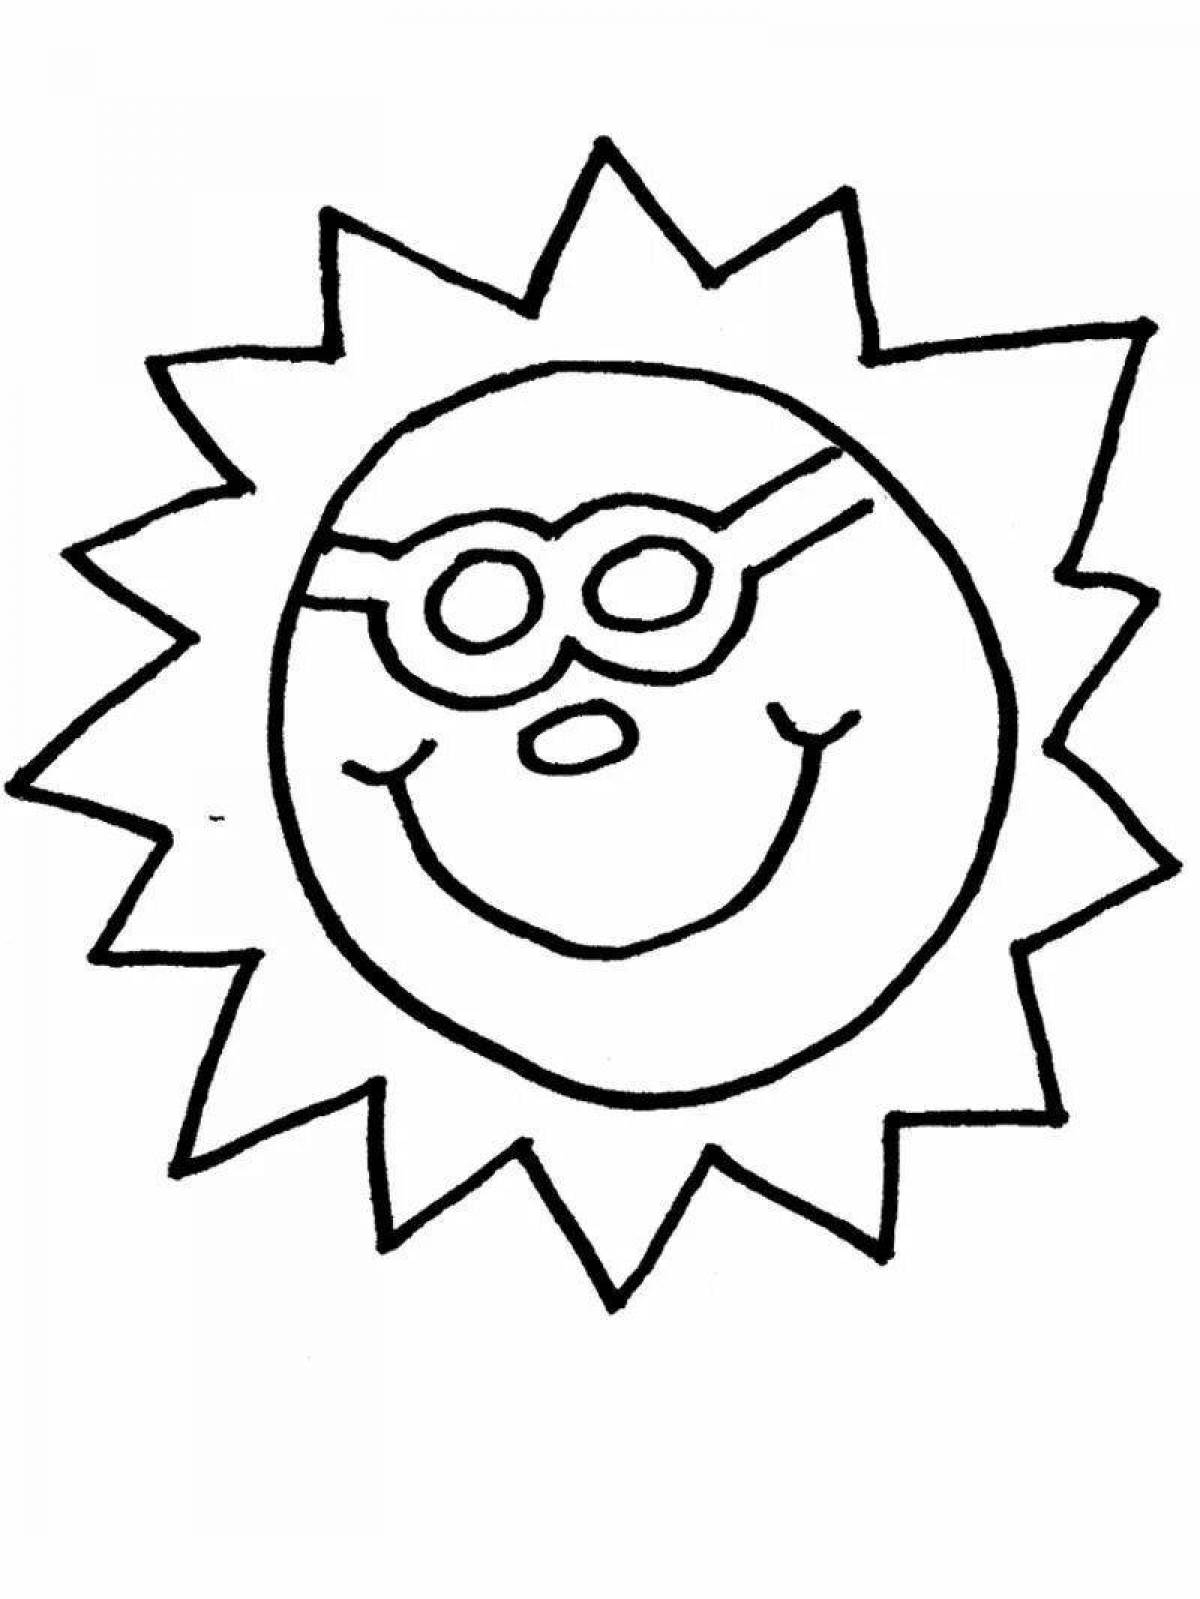 Exquisite sun coloring book for kids